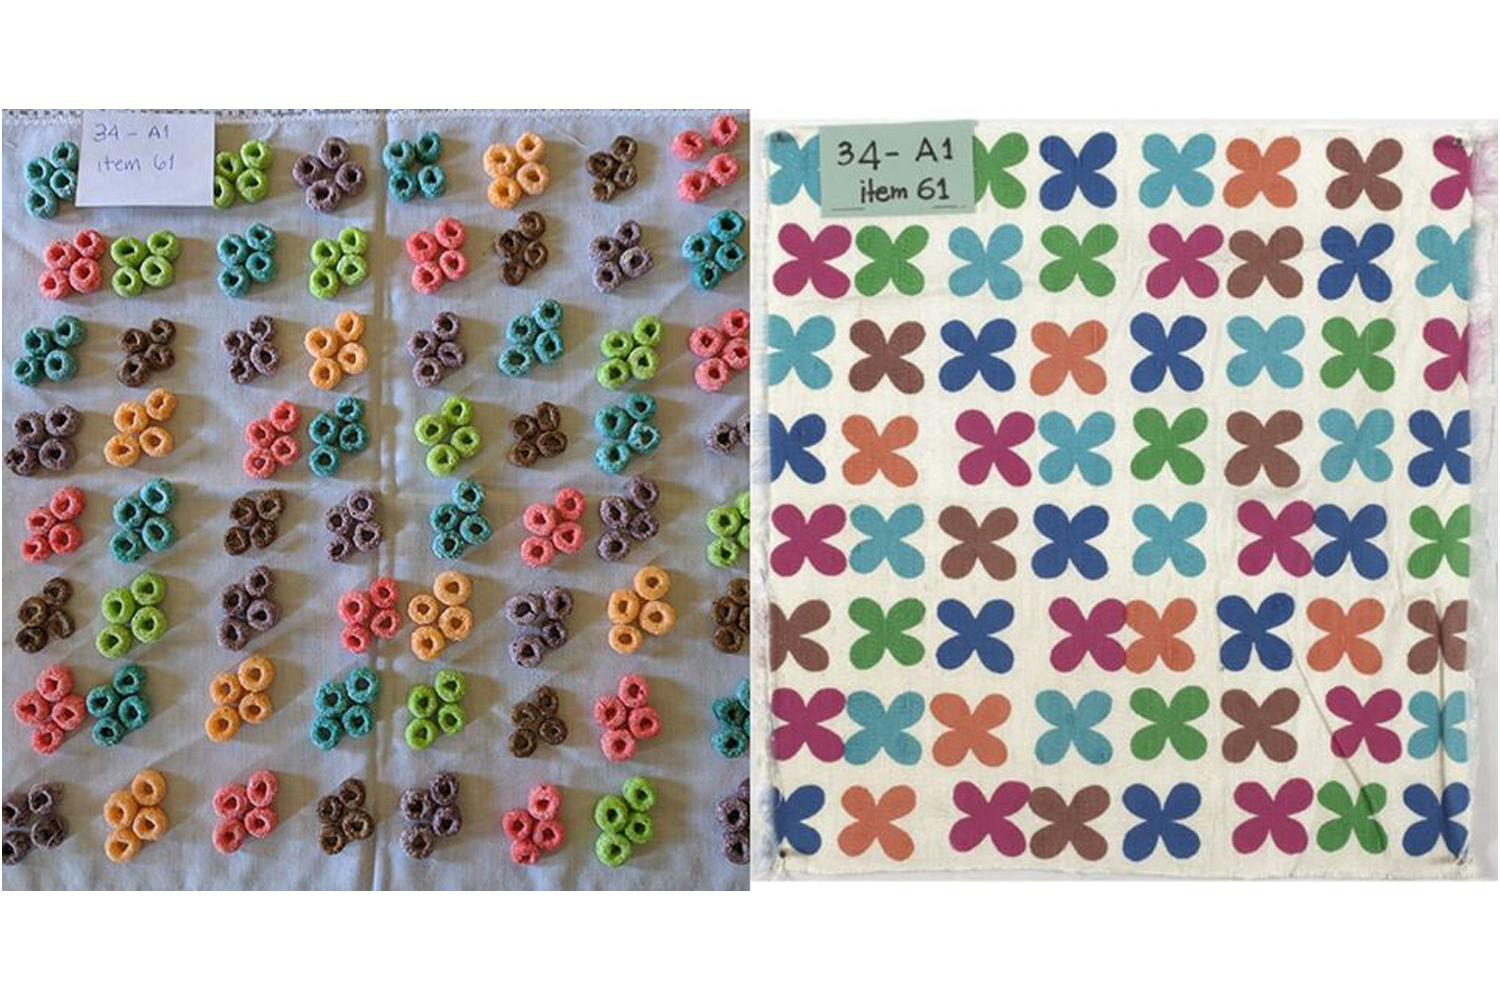 (Right) Herman Miller “Quatrefoil” (#627) by Alexander Girard, sample (Item No. 61) for Girl’s Bedroom #2 Curtains, 1955/1957, Miller House (Columbus, Ind.), Miller House and Garden Collection (M003)  (Left) Created by Alba Fernandez-Keys, Newfields